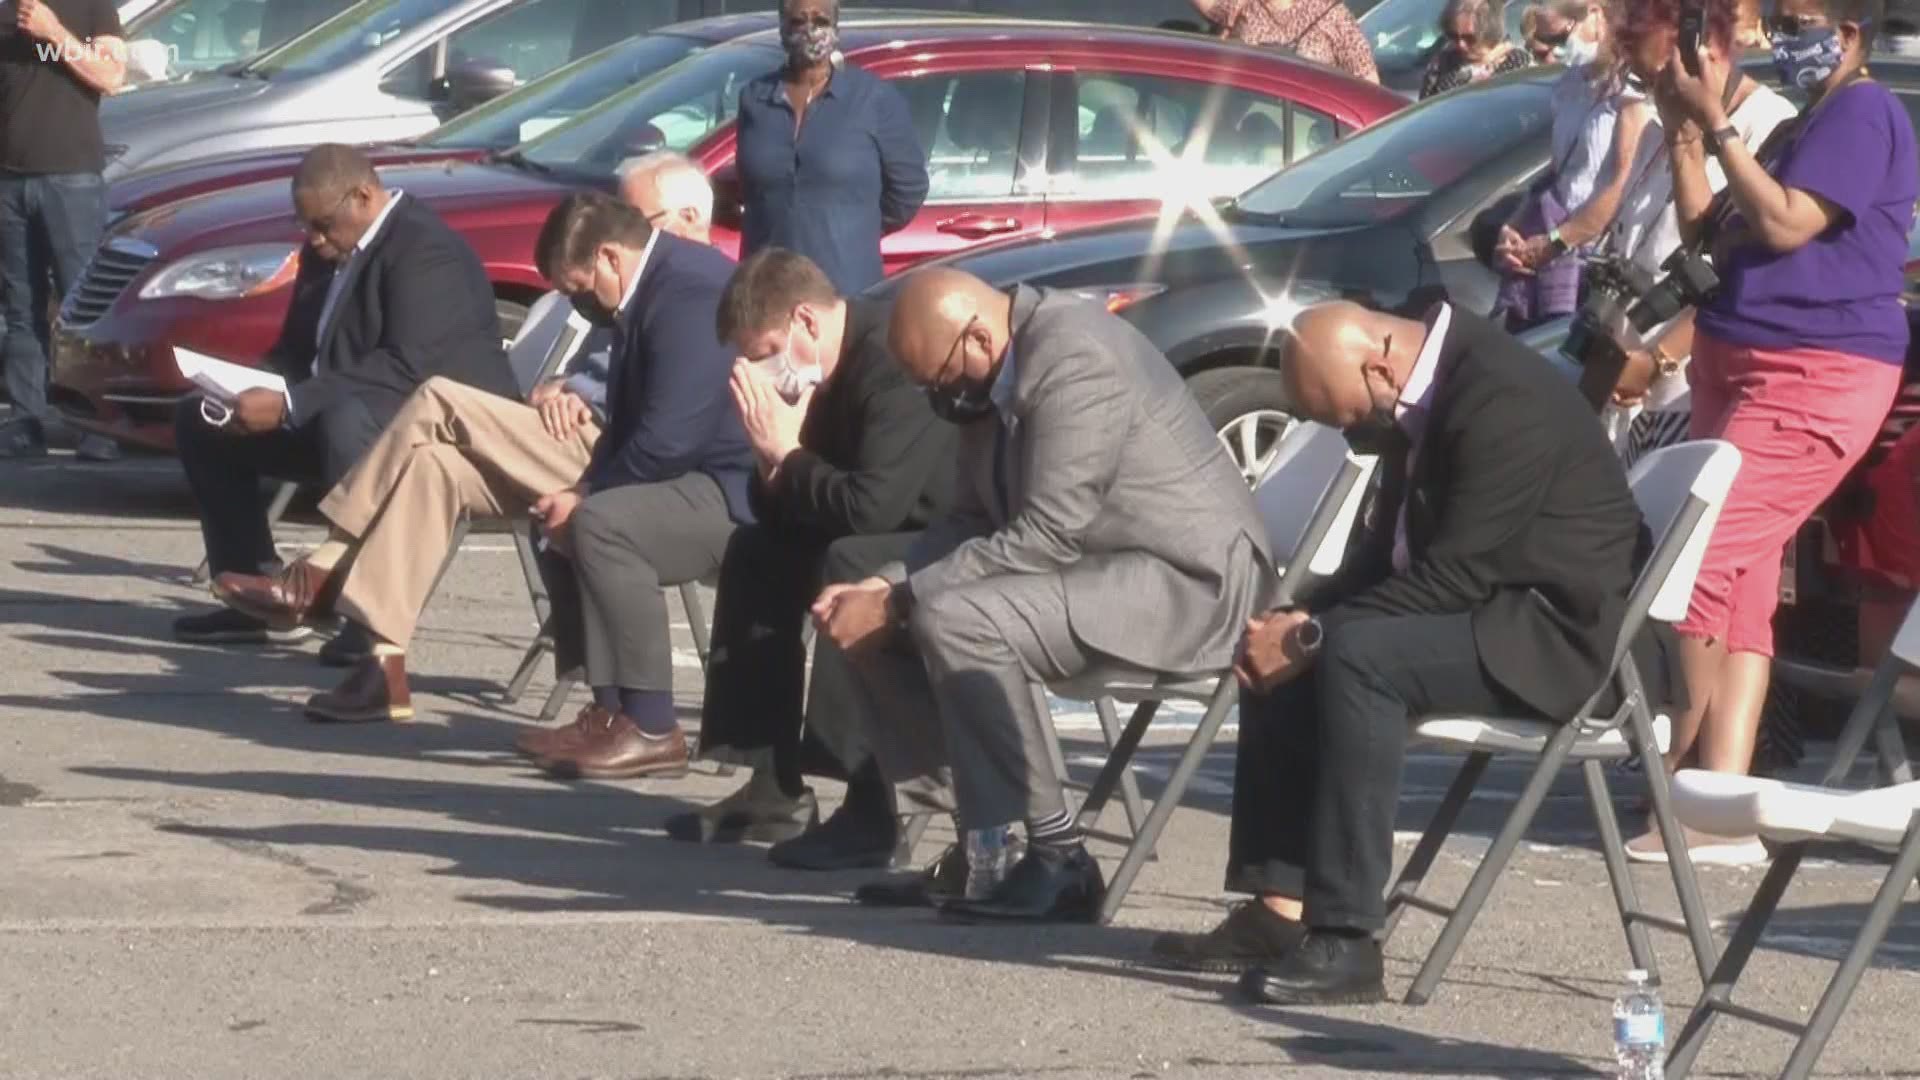 The East Knoxville community is calling for unity. The church -- right next to Austin-East -- held a prayer service led by area pastors.